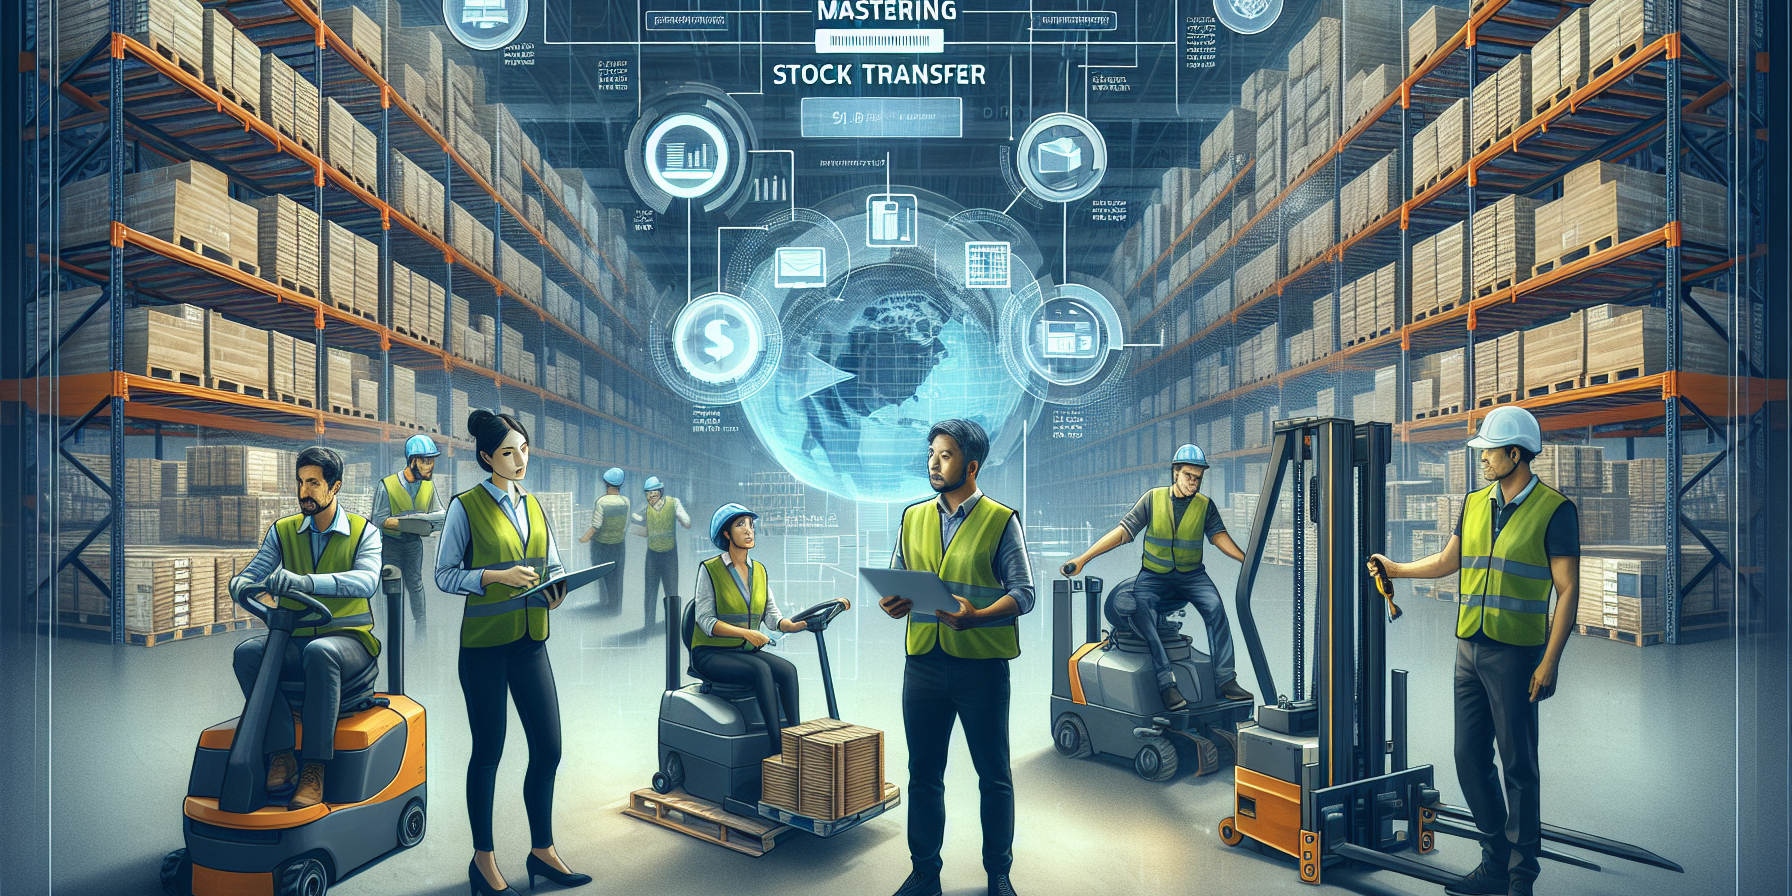 Cover Image for Mastering Stock Transfer: A Comprehensive Guide to Conveyance in Asset, Inventory, and Warehouse Management Software